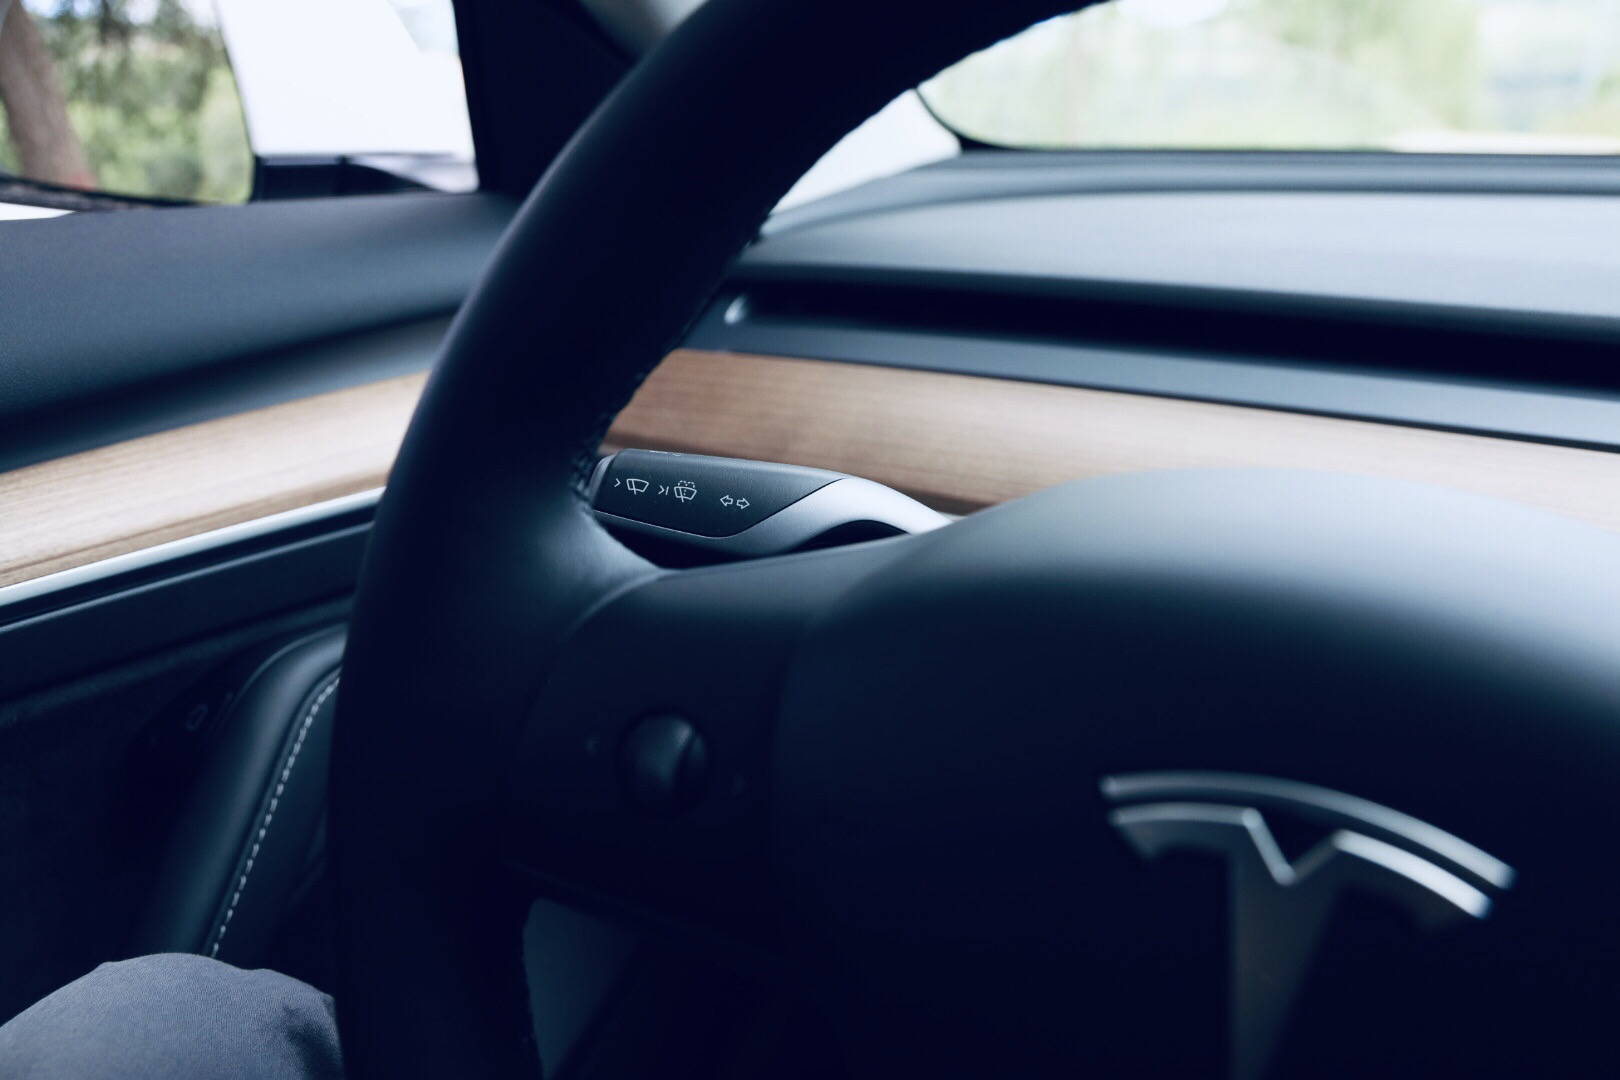 Tesla & Elon Musk are being sued over FSD and Autopilot